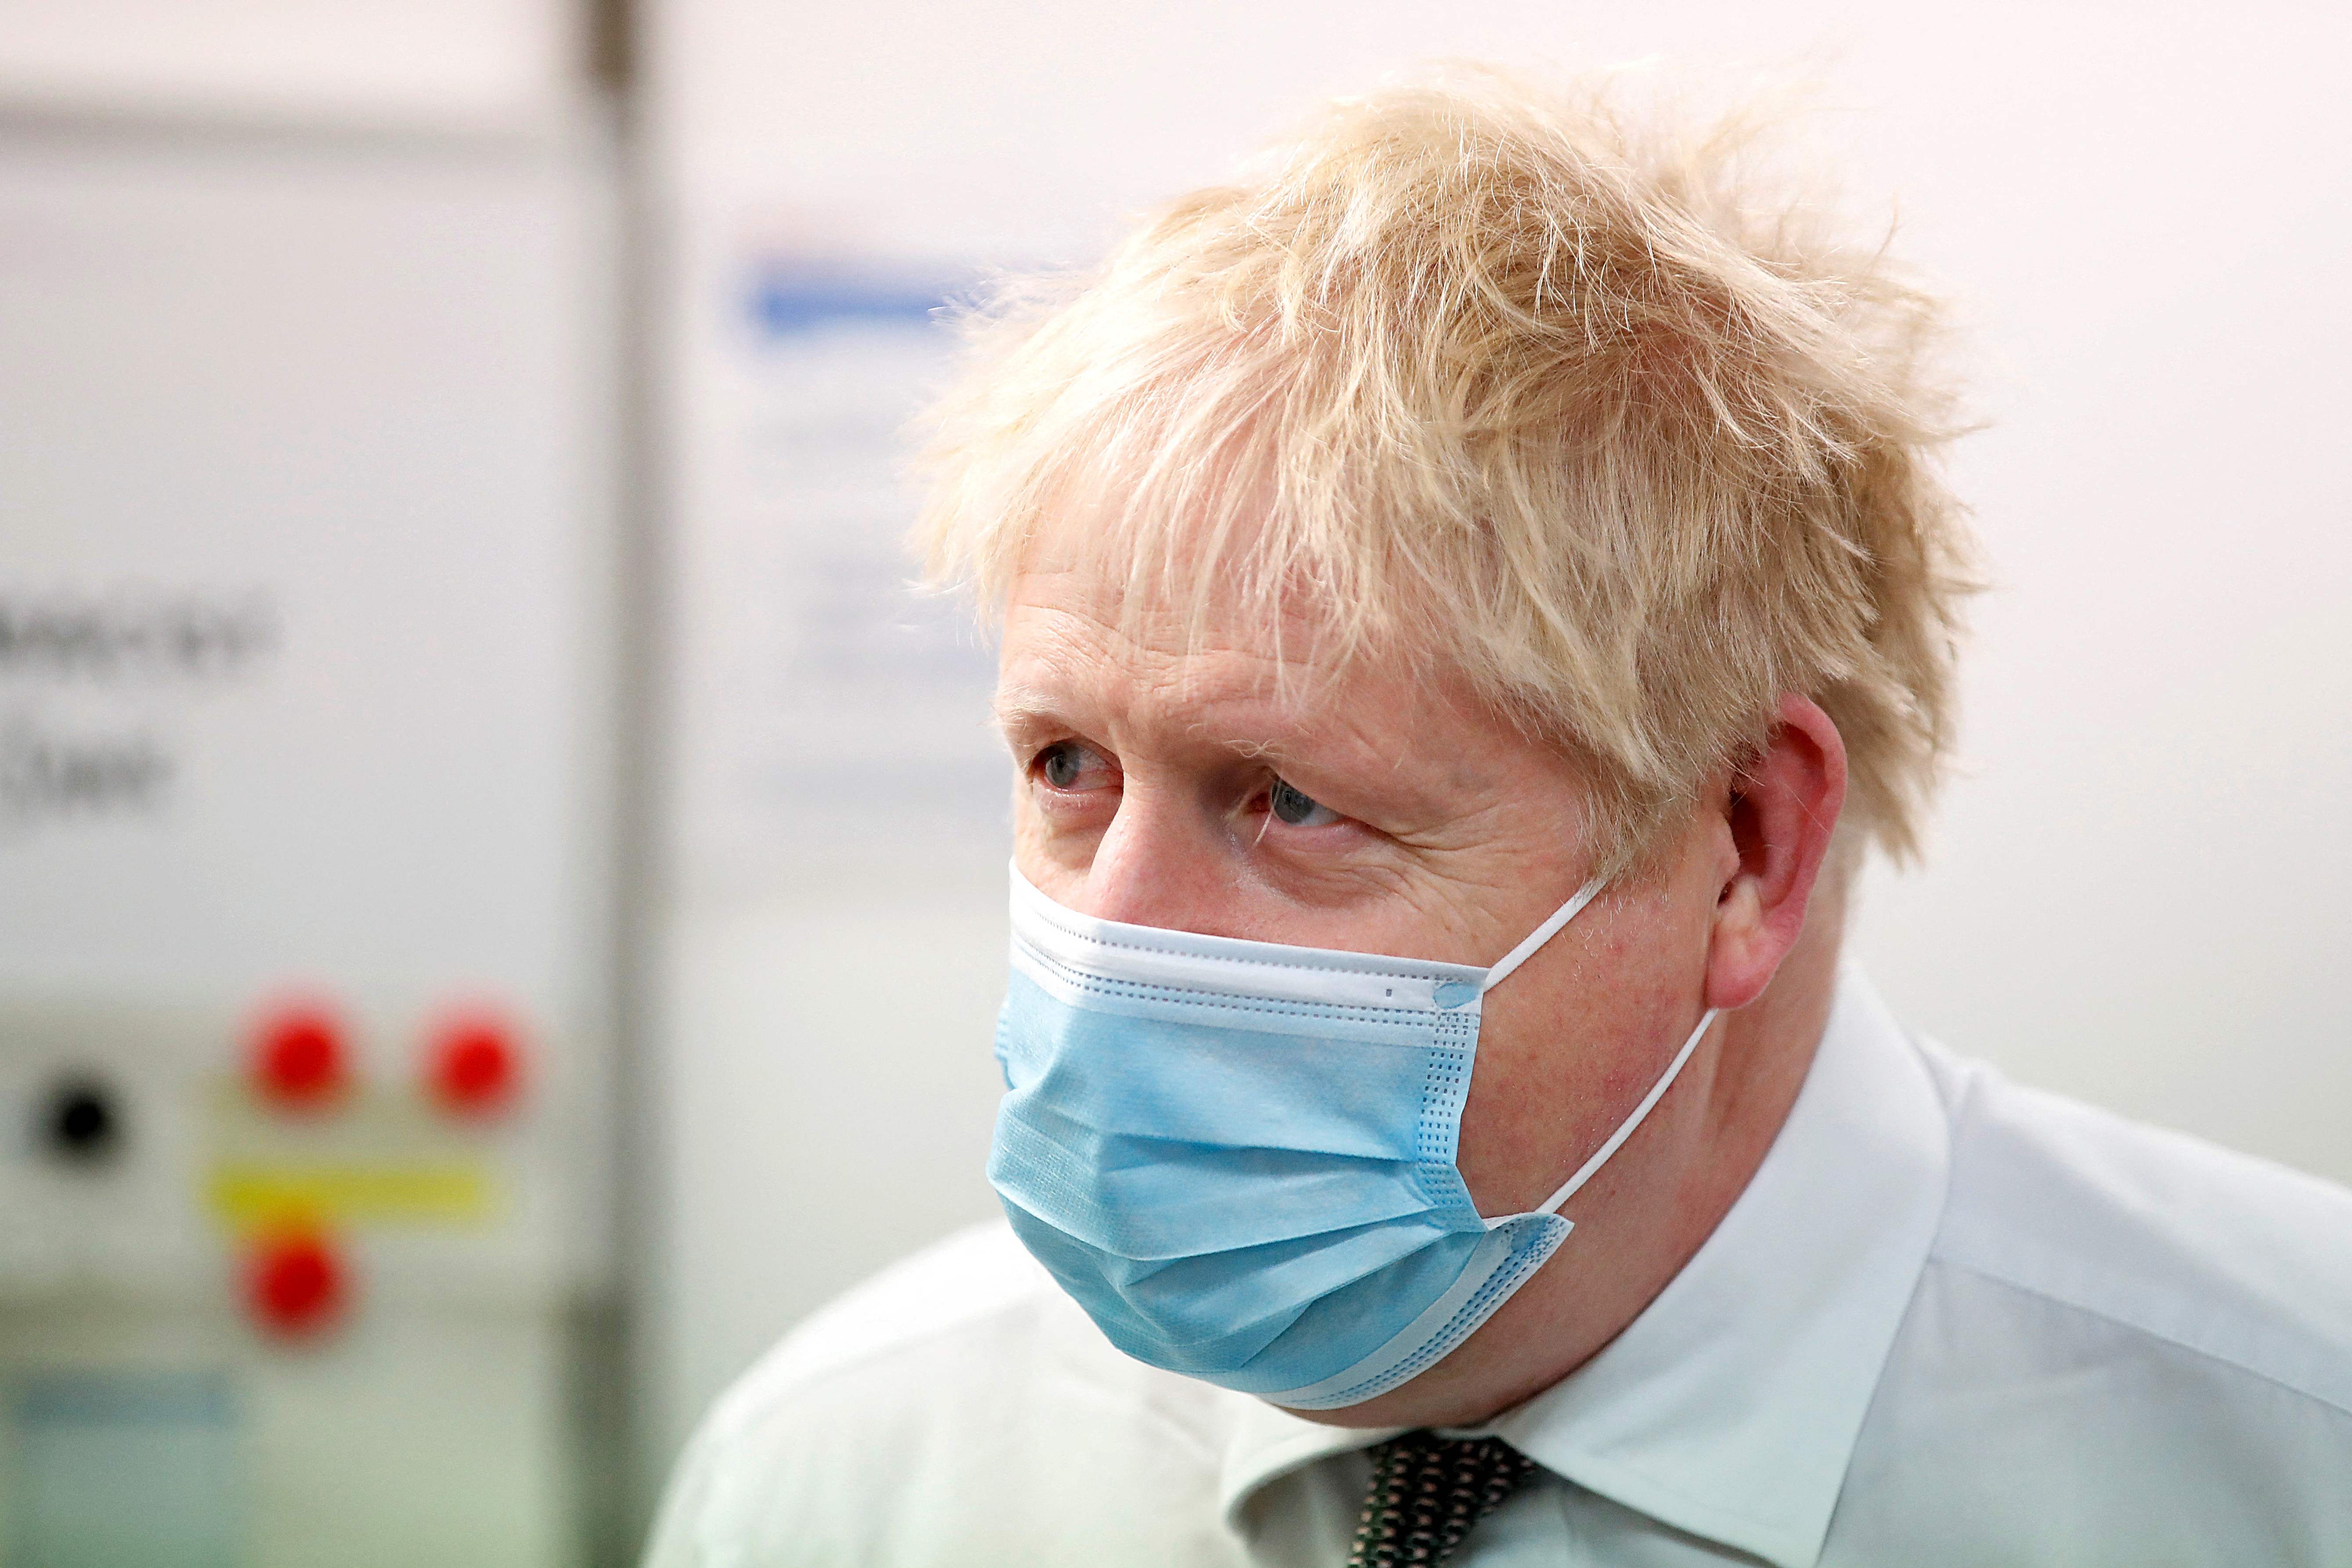 Johnson says there are ‘people out there spouting complete nonsense about vaccination’